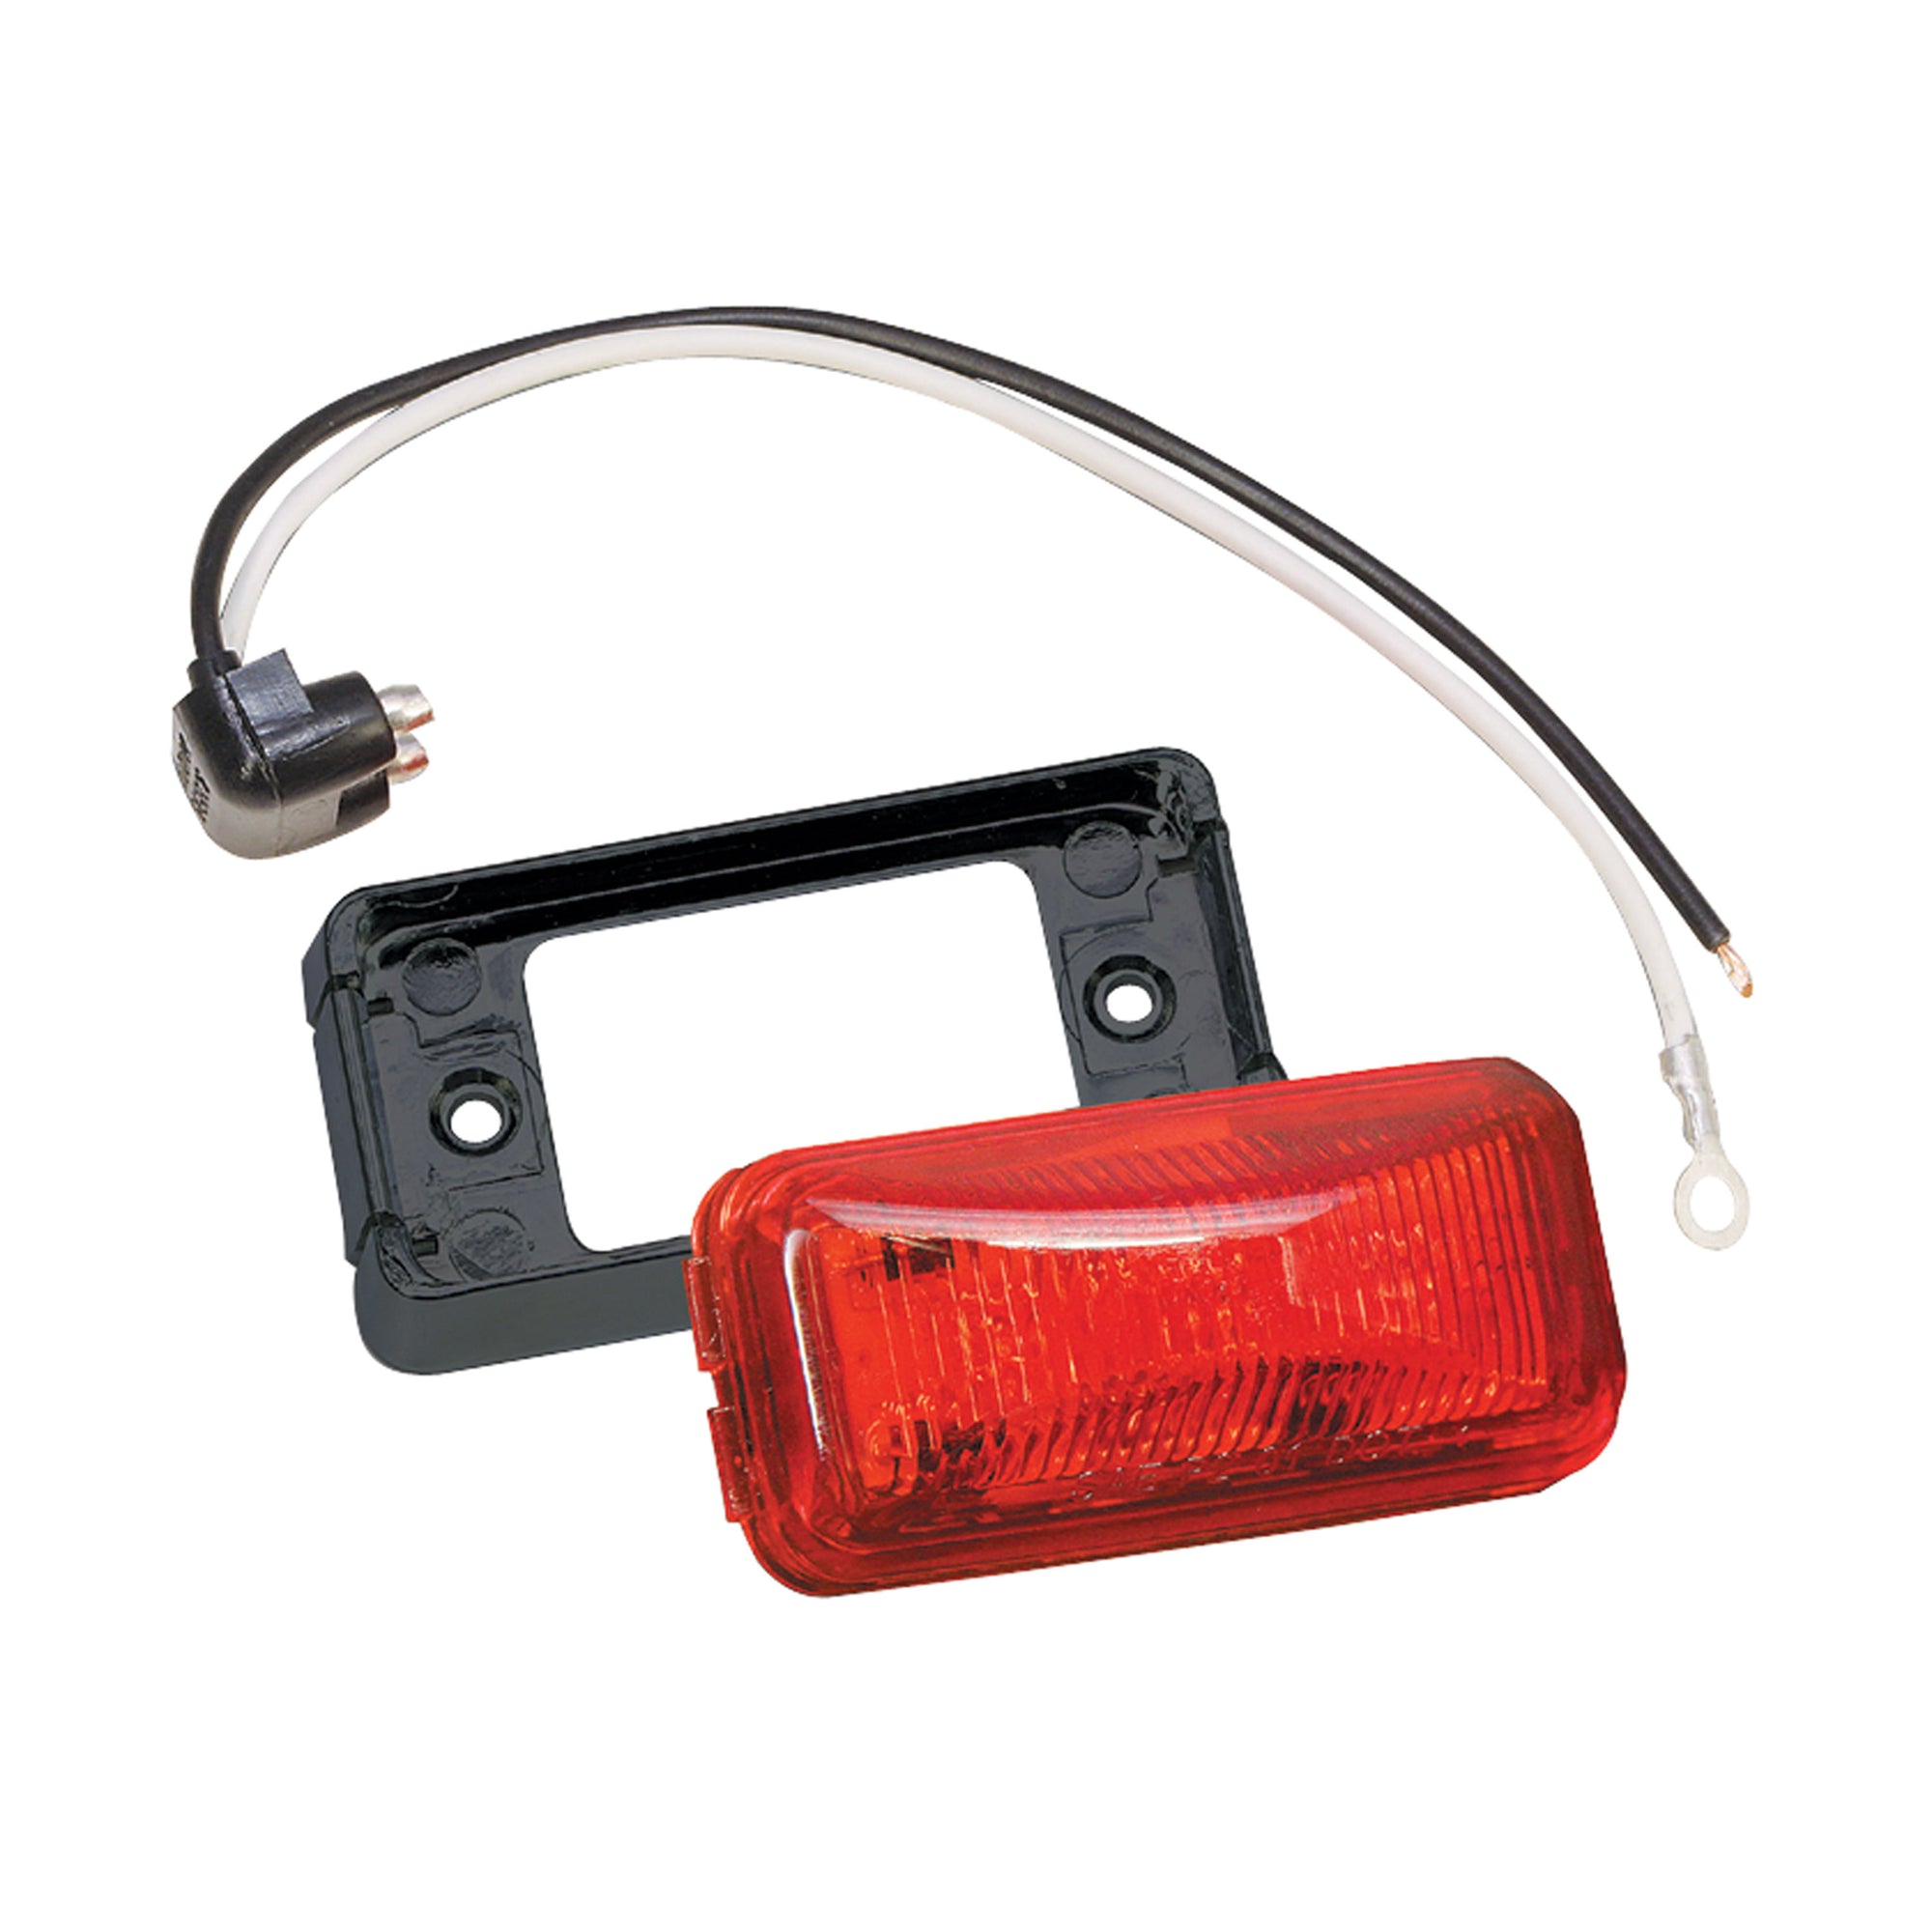 Wesbar 401581 LED Clearance Light Module Red